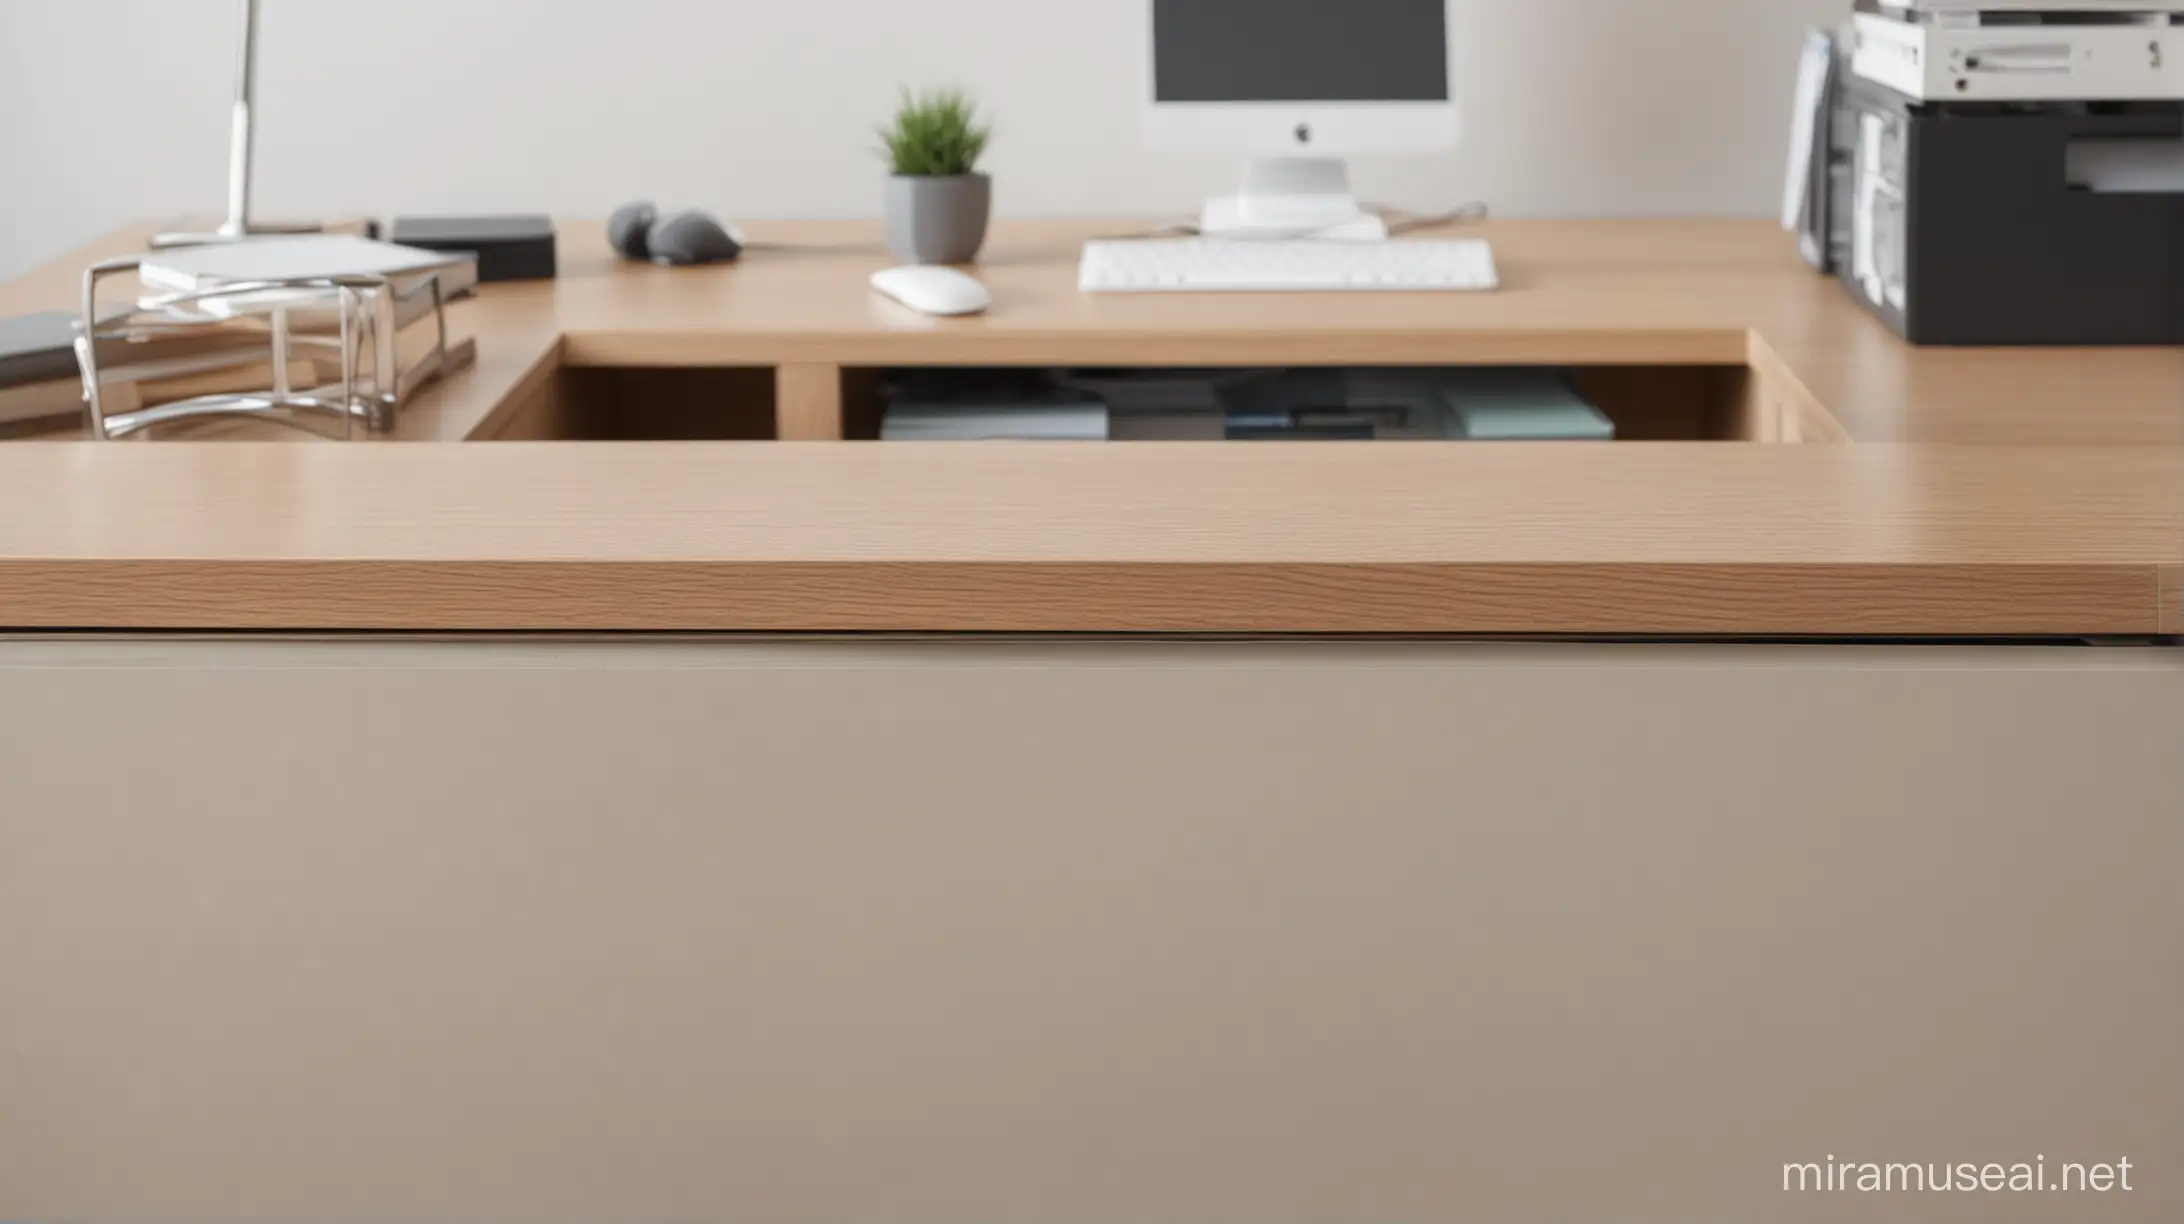 CloseUp View of a Modern Office Desk with Essential Accessories